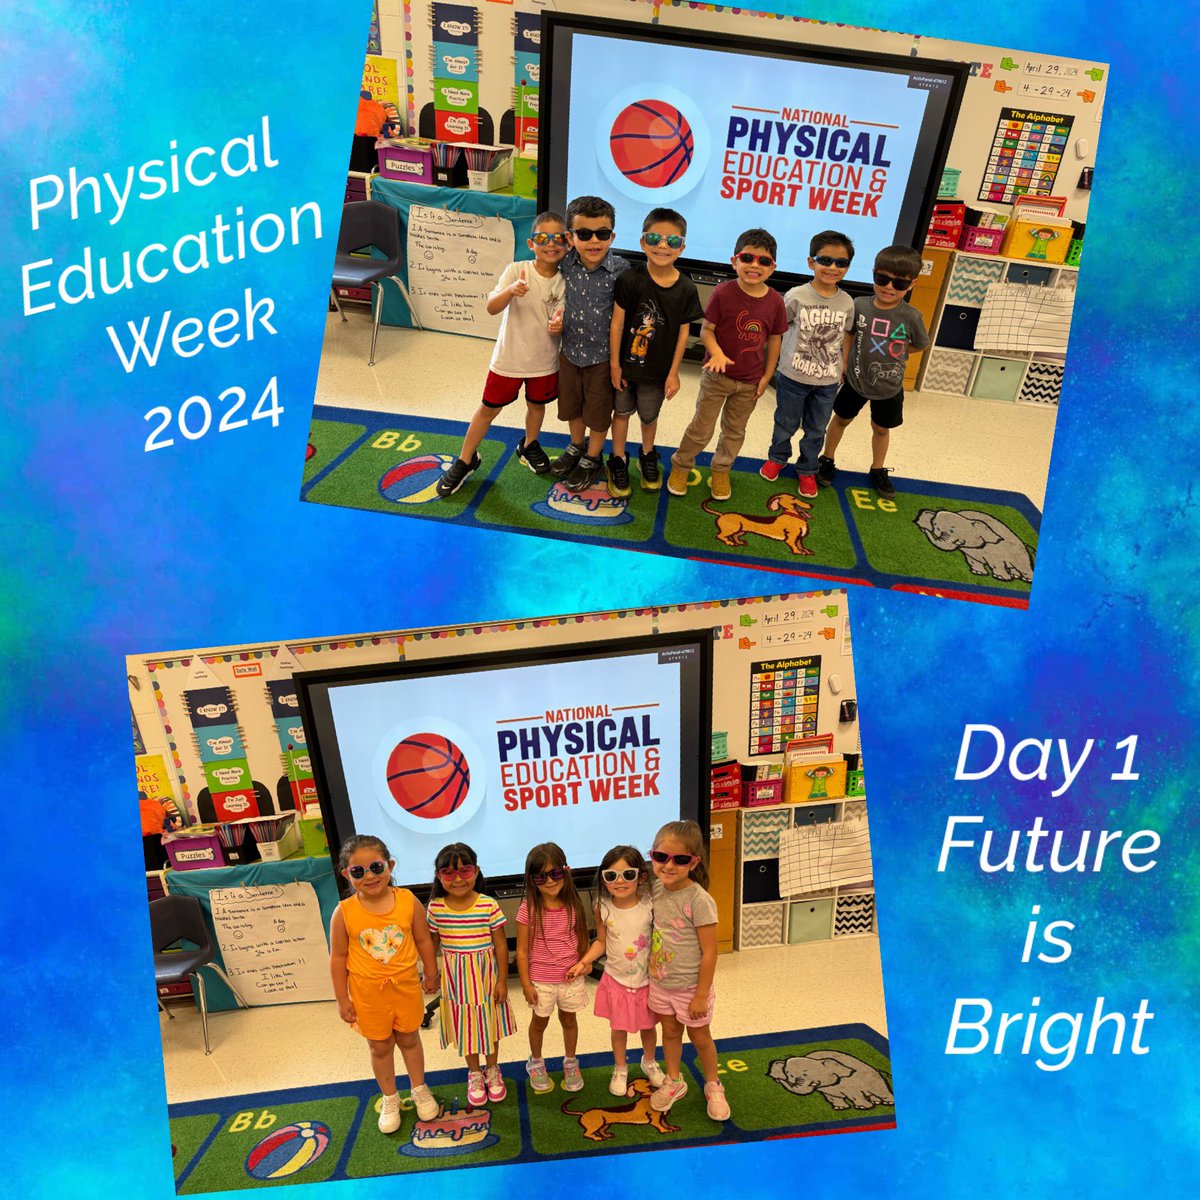 Day 1 of National Physical Education Week begins with wearing your sunglasses because the future is so BRIGHT! 😎 @Rockets120 @McAllenISD #RocketPride #NationalPhysicalEducationWeek